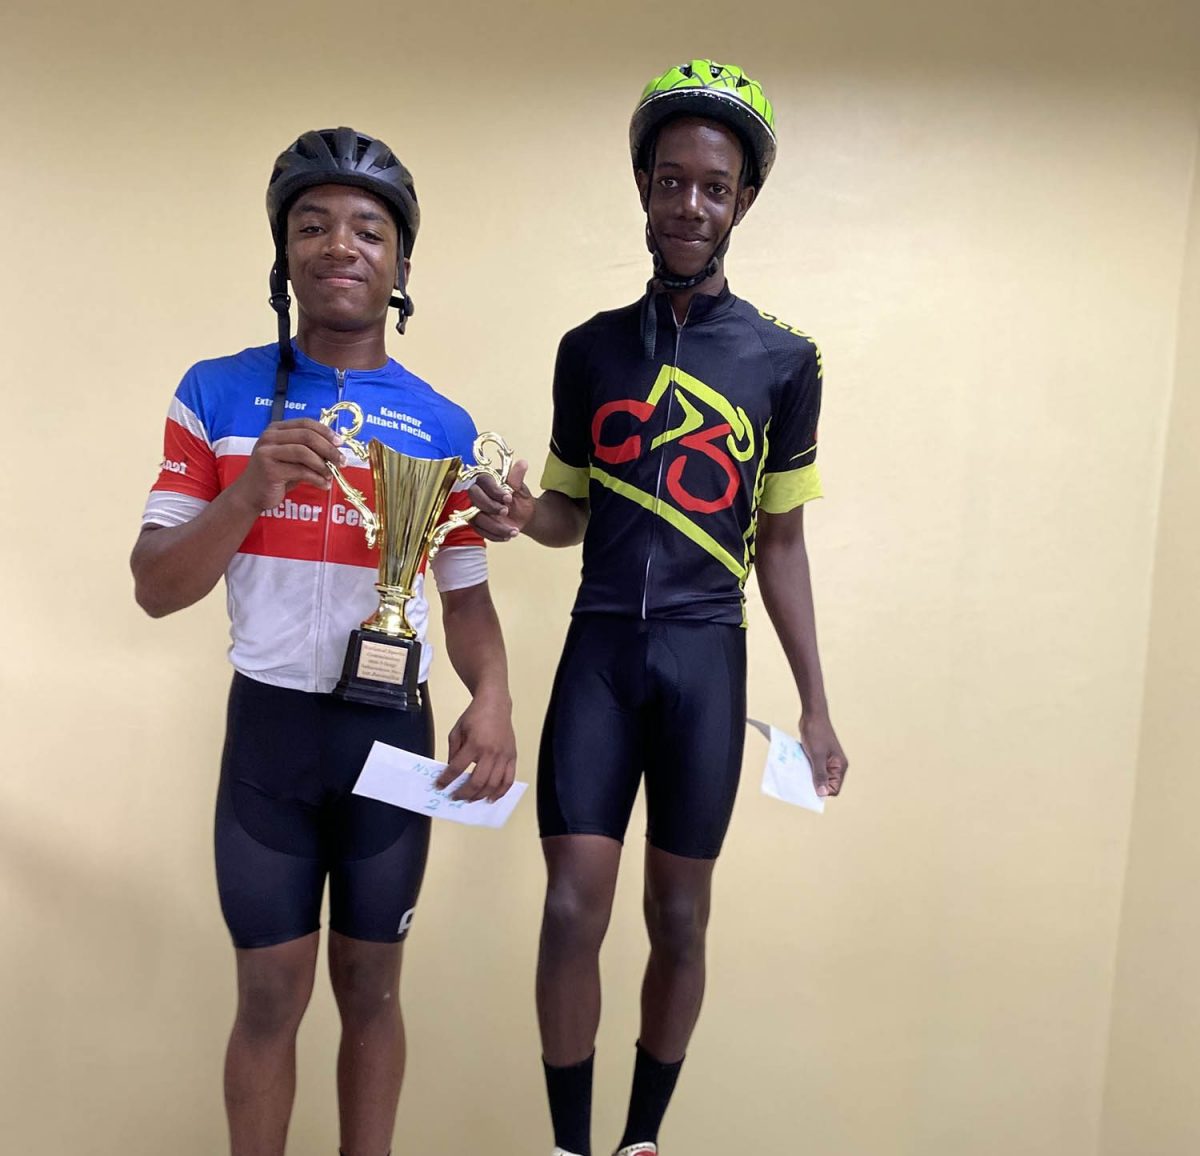 Sidwell Sandy, right,  who finished atop the podium in the juvenile category at the recently concluded Independence Three-Stage road race.
